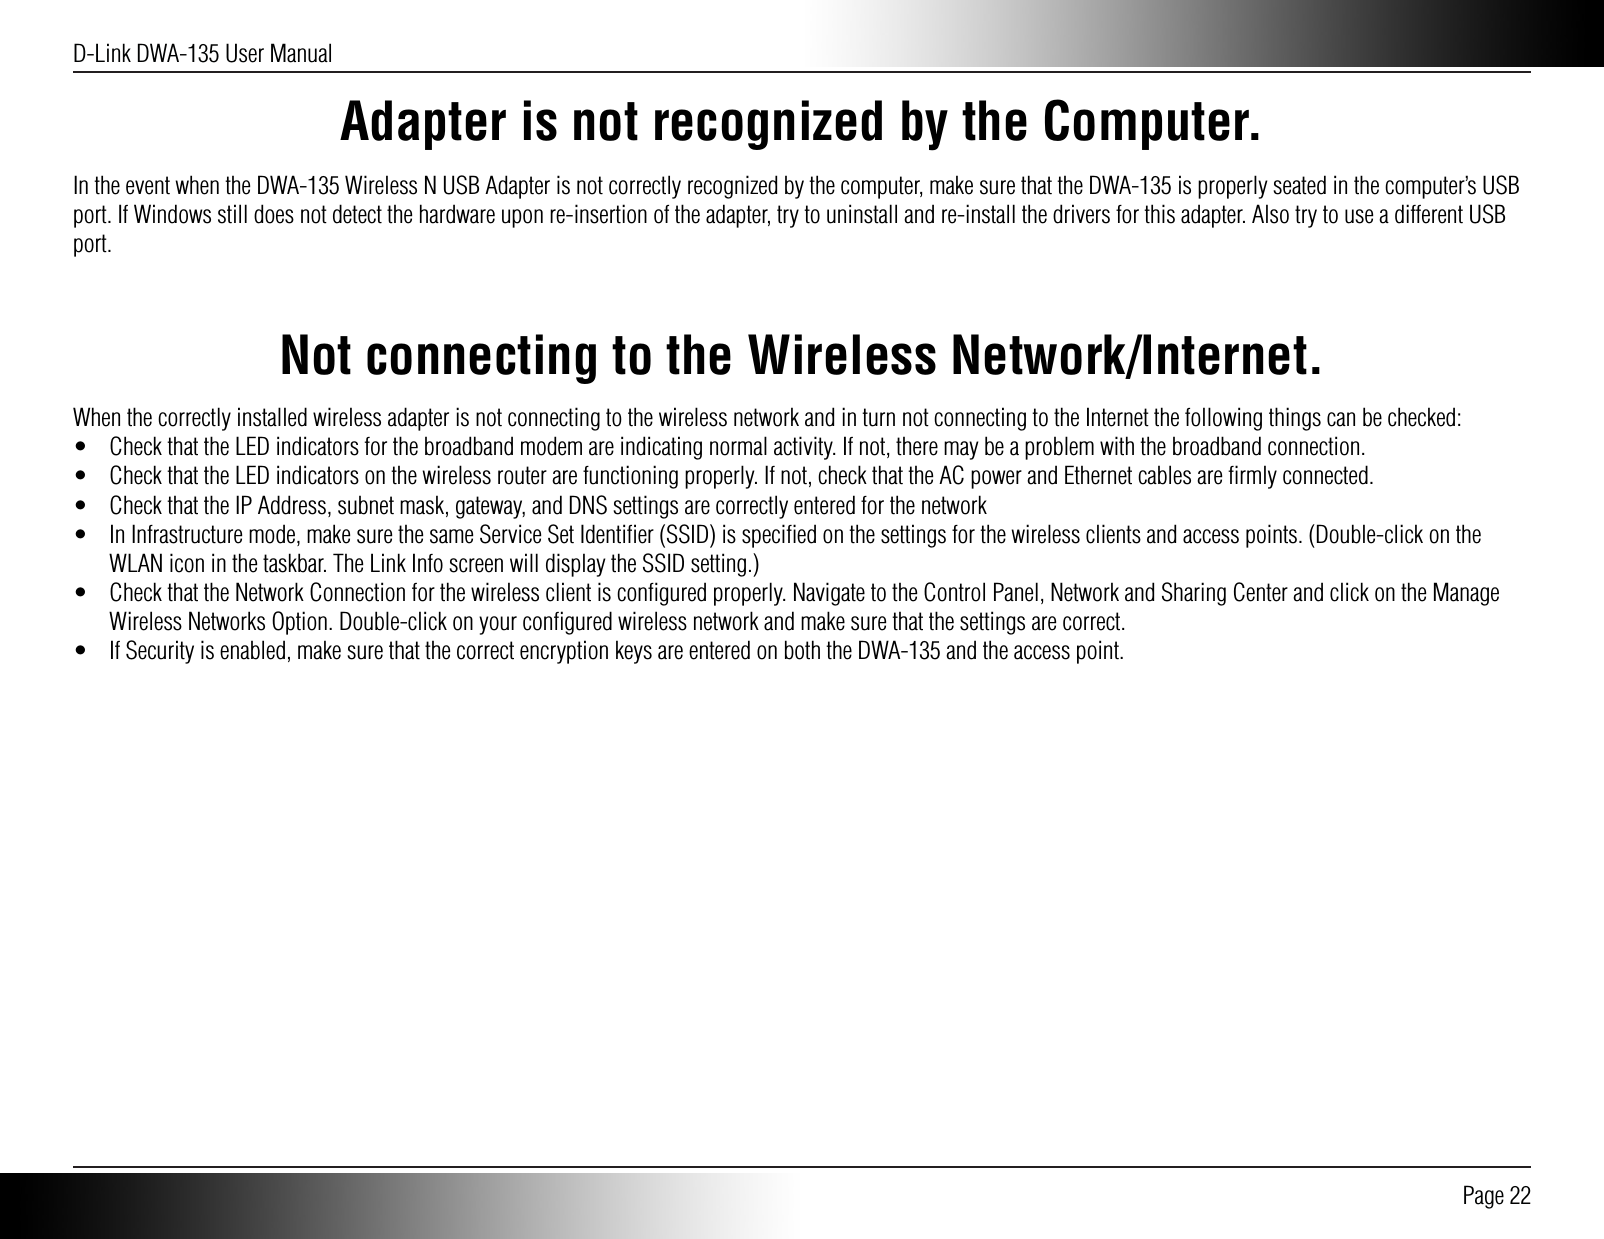 D-Link DWA-135 User Manual Page 22Adapter is not recognized by the Computer.In the event when the DWA-135 Wireless N USB Adapter is not correctly recognized by the computer, make sure that the DWA-135 is properly seated in the computer’s USB port. If Windows still does not detect the hardware upon re-insertion of the adapter, try to uninstall and re-install the drivers for this adapter. Also try to use a different USB port.Not connecting to the Wireless Network/Internet.When the correctly installed wireless adapter is not connecting to the wireless network and in turn not connecting to the Internet the following things can be checked:•  Check that the LED indicators for the broadband modem are indicating normal activity. If not, there may be a problem with the broadband connection.•  Check that the LED indicators on the wireless router are functioning properly. If not, check that the AC power and Ethernet cables are ﬁrmly connected.•  Check that the IP Address, subnet mask, gateway, and DNS settings are correctly entered for the network•  In Infrastructure mode, make sure the same Service Set Identiﬁer (SSID) is speciﬁed on the settings for the wireless clients and access points. (Double-click on the WLAN icon in the taskbar. The Link Info screen will display the SSID setting.)•  Check that the Network Connection for the wireless client is conﬁgured properly. Navigate to the Control Panel, Network and Sharing Center and click on the Manage Wireless Networks Option. Double-click on your conﬁgured wireless network and make sure that the settings are correct.•  If Security is enabled, make sure that the correct encryption keys are entered on both the DWA-135 and the access point. 